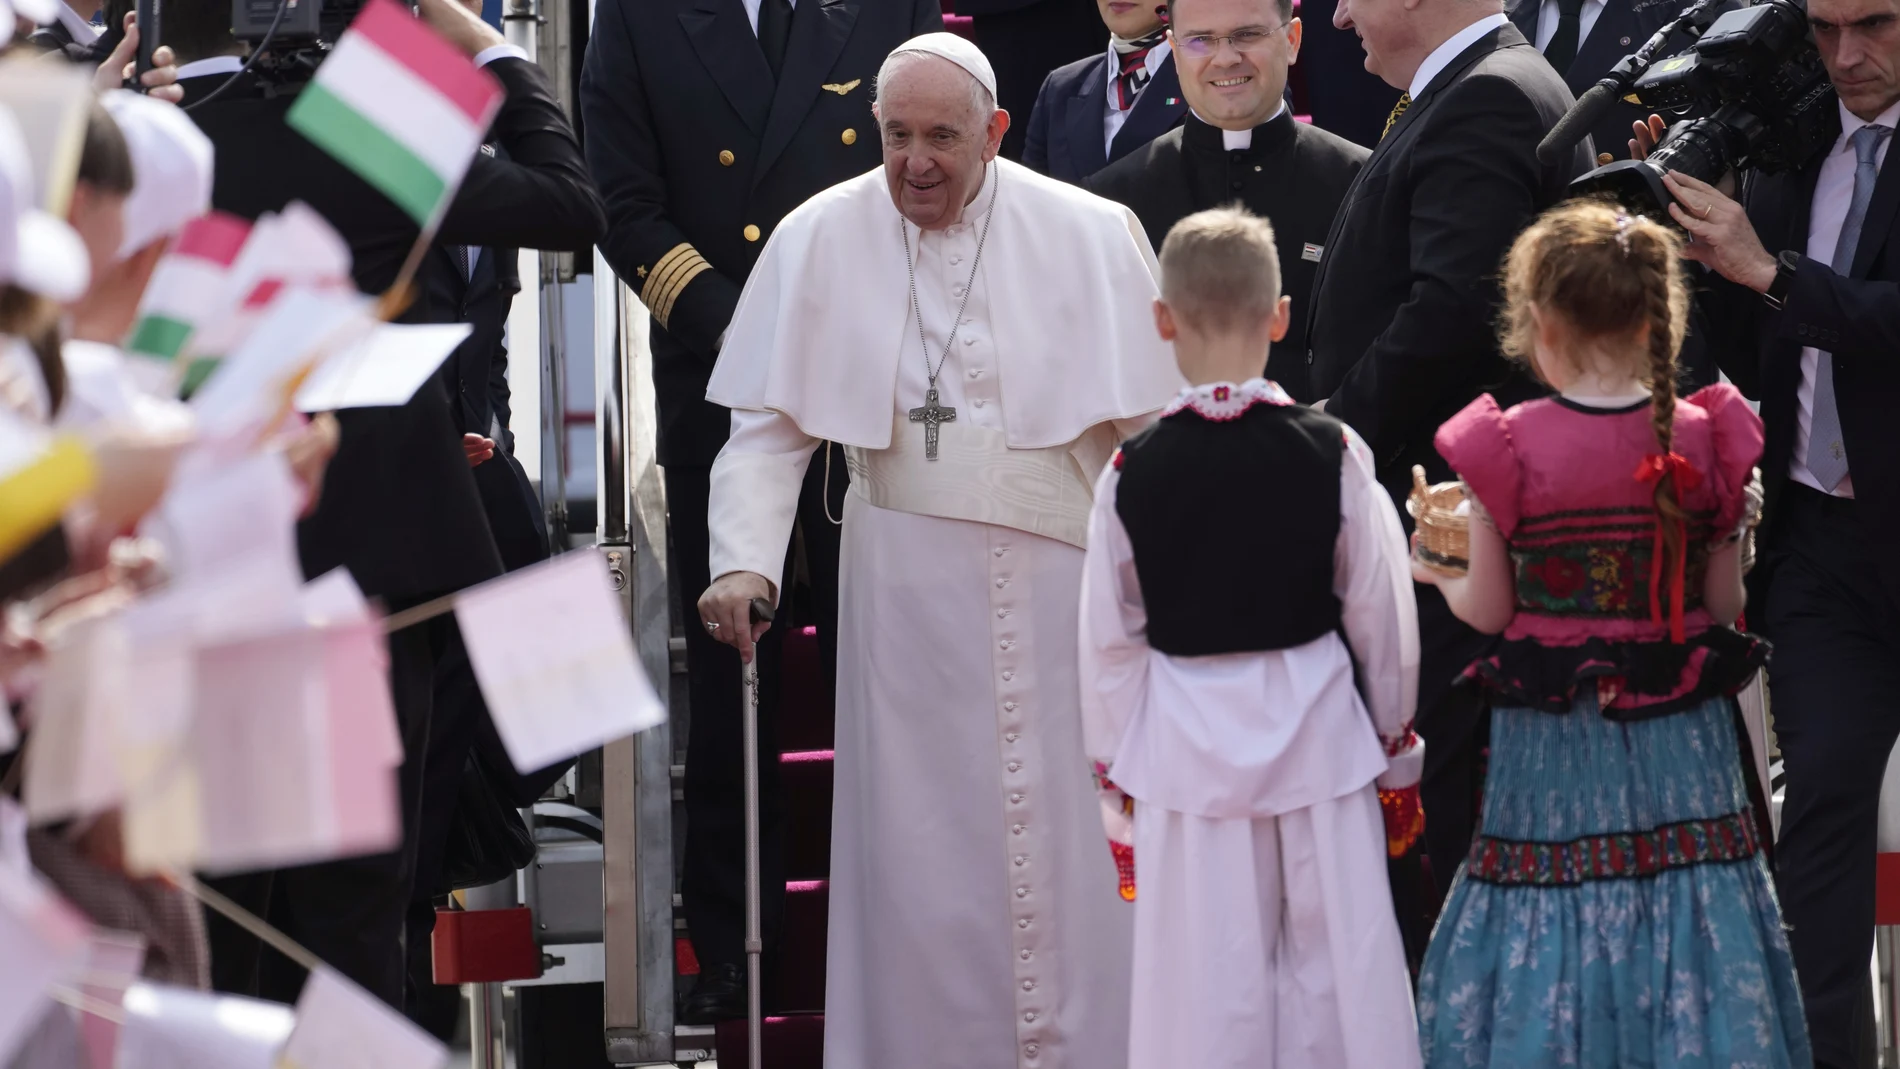 Pope Francis smiles as he arrives for the official welcome ceremony at Budapest's International Airport in Budapest, Hungary, Friday, April 28, 2023.